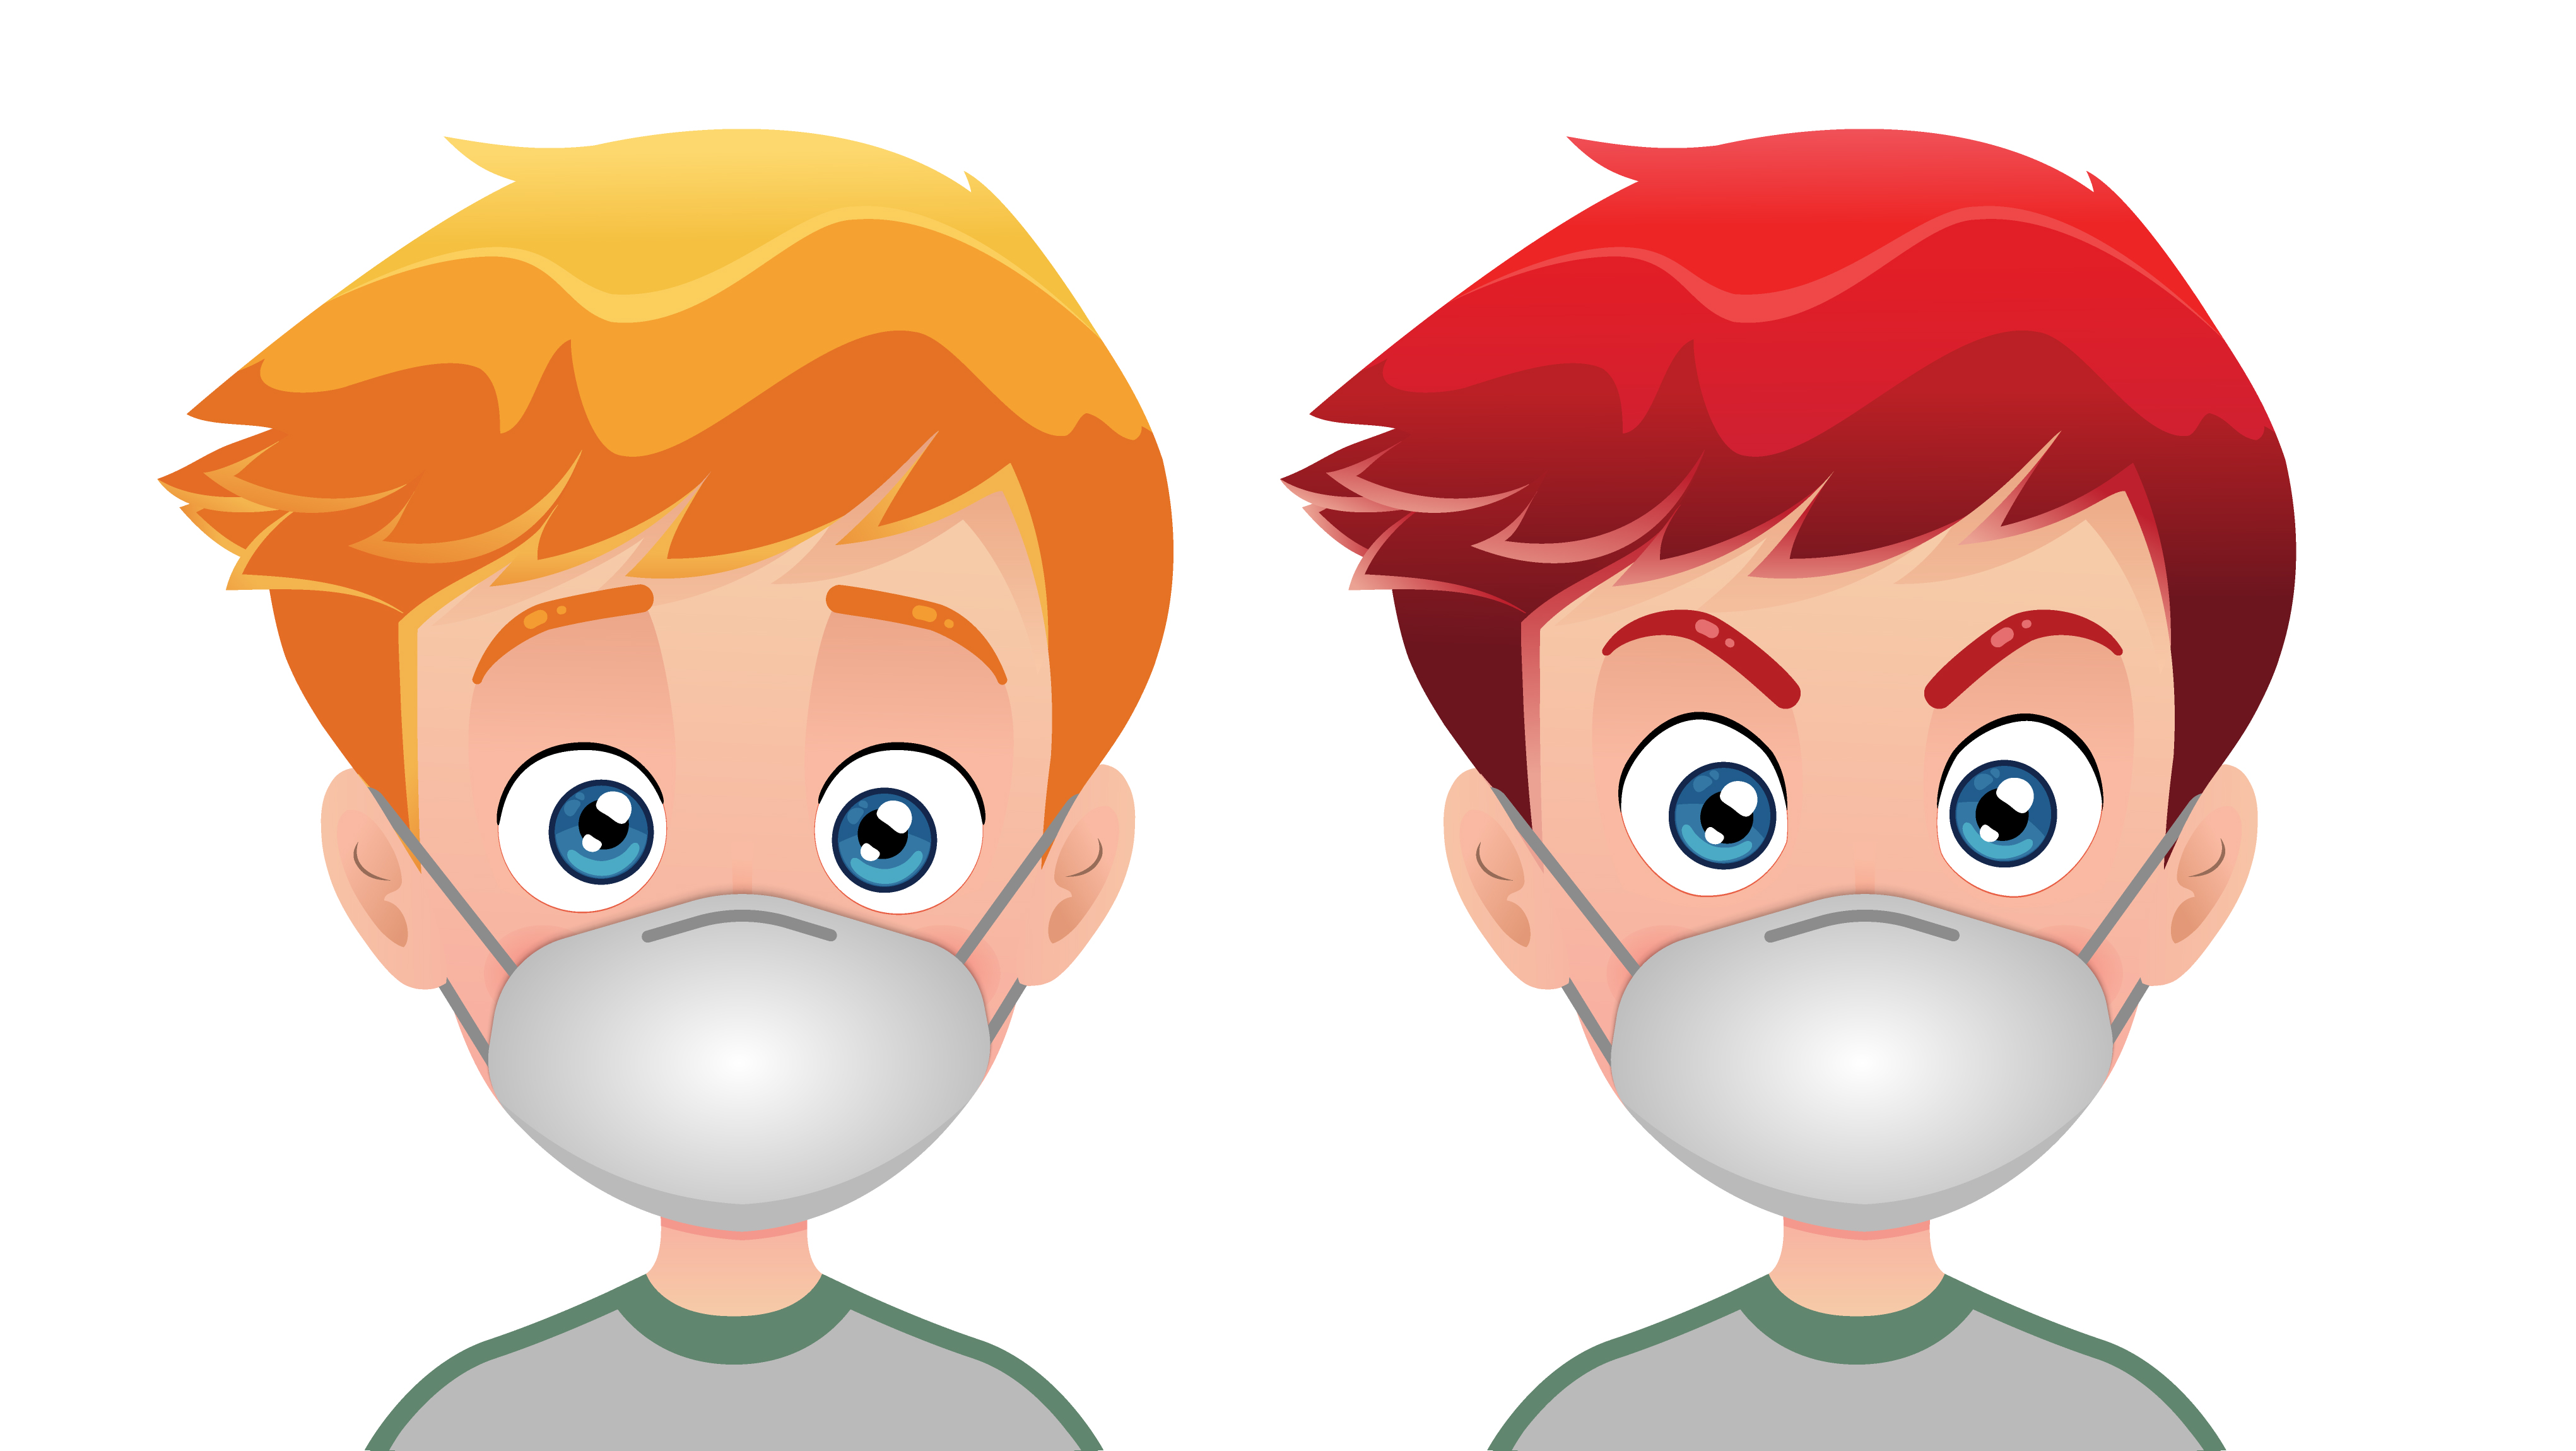 Download Boys wearing surgical mask 1176960 - Download Free Vectors ...